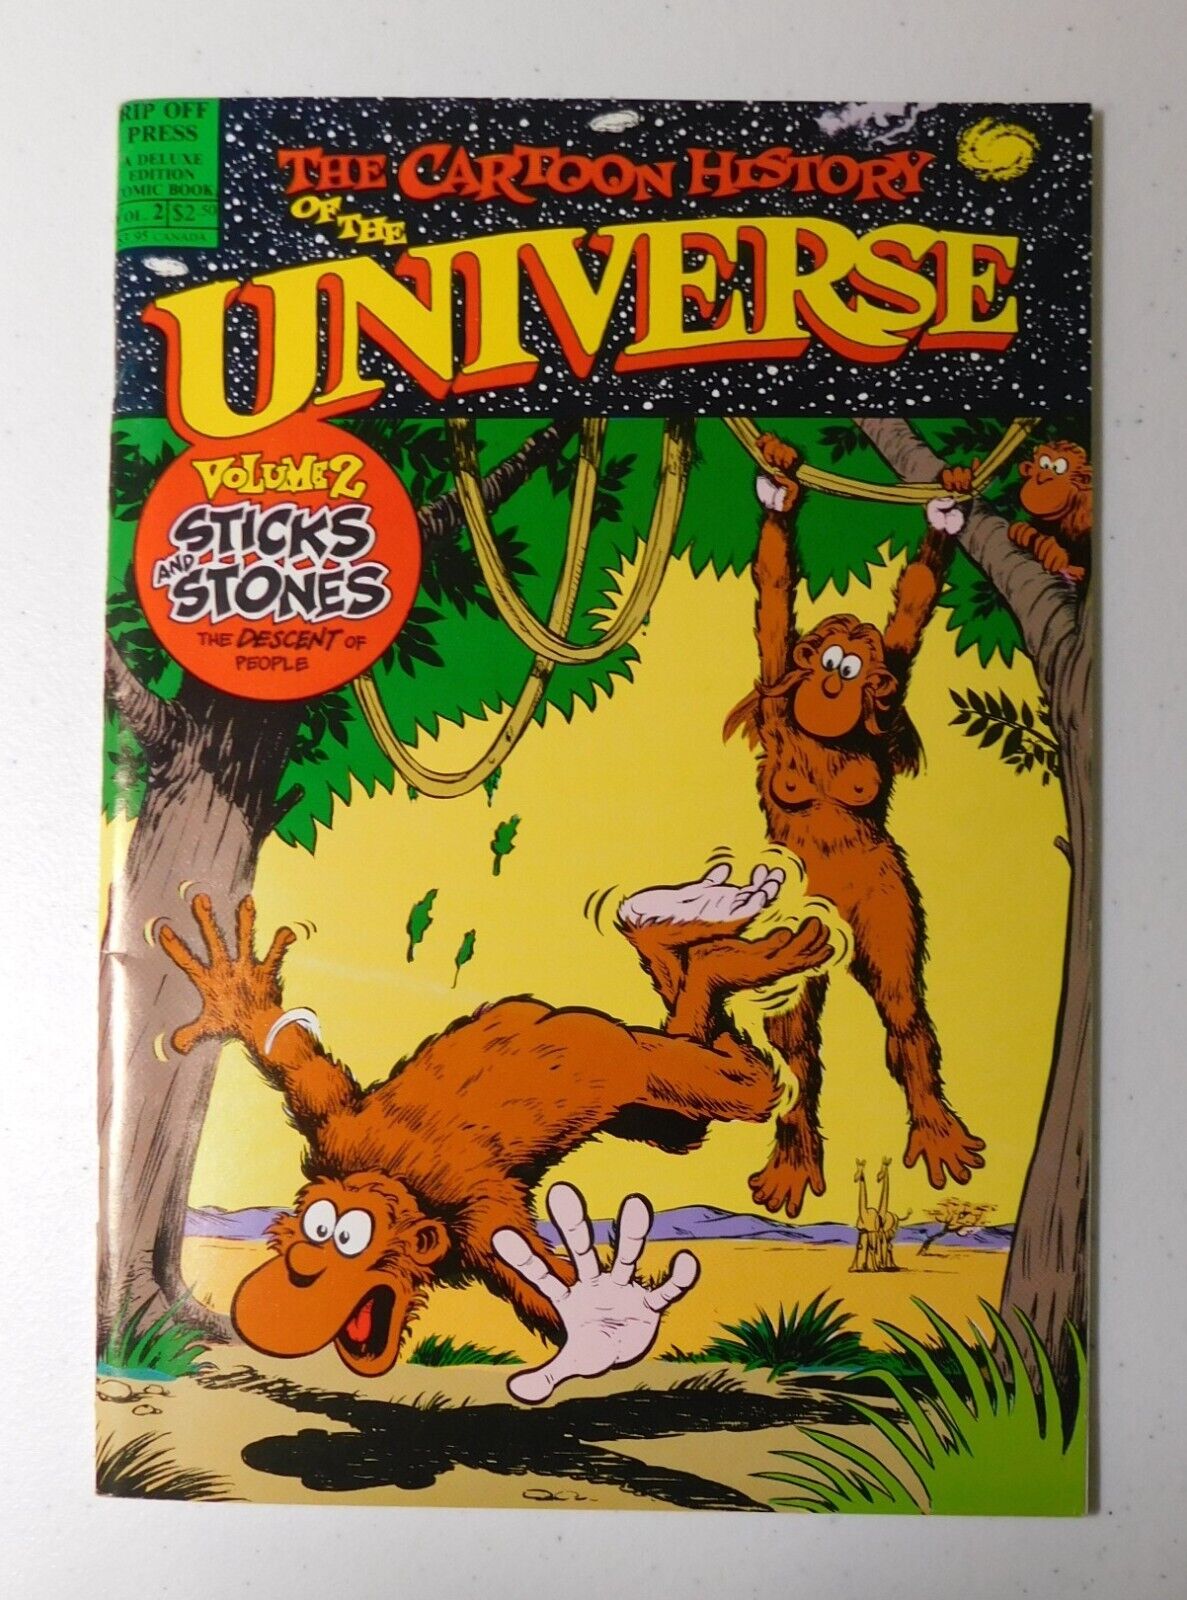 The Cartoon History of the Universe Vol. 2 Deluxe Edition